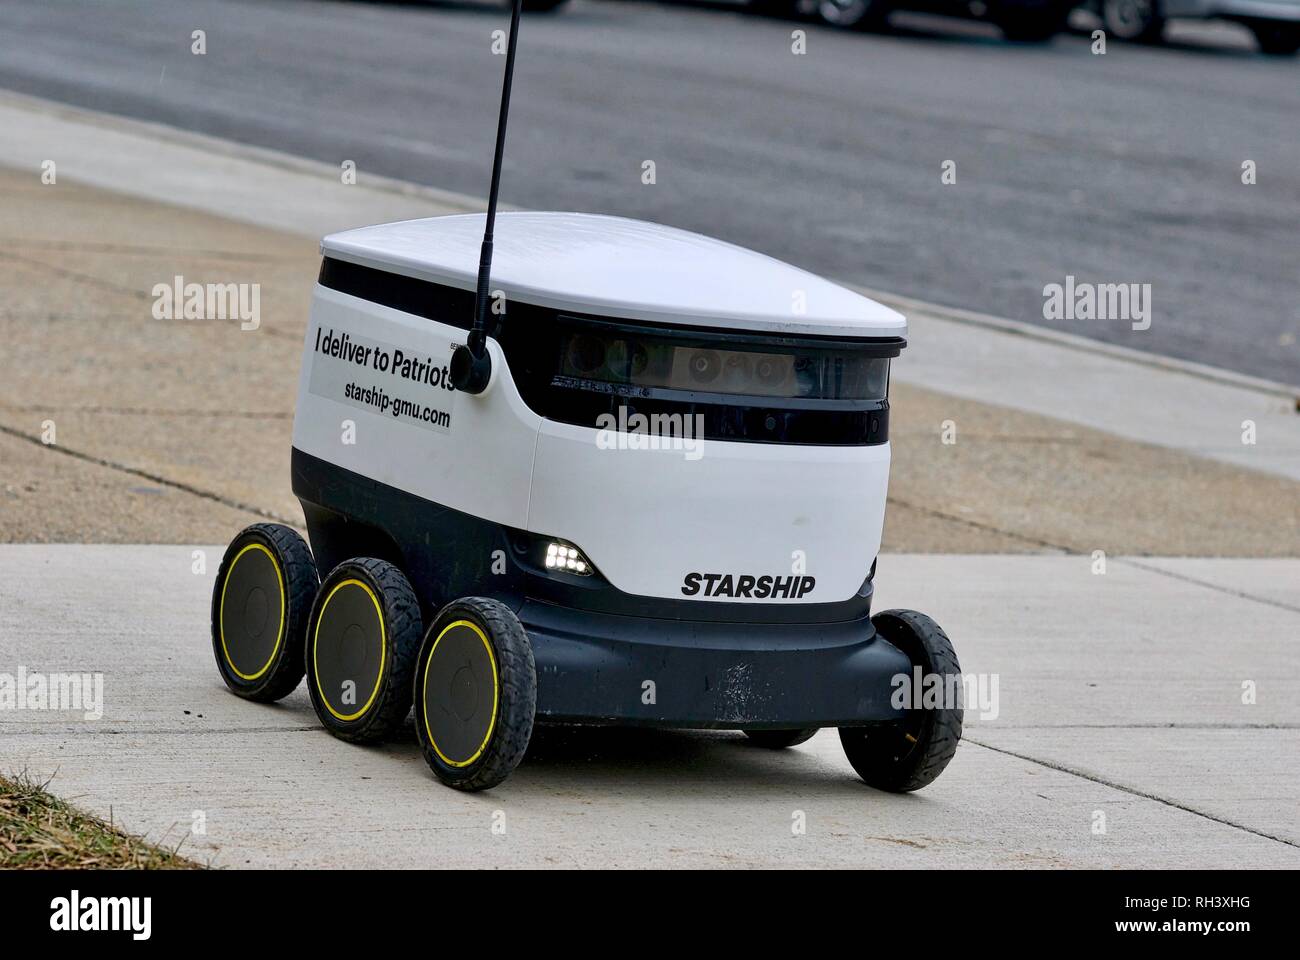 Amazon Delivery Robot High Resolution Stock Photography and Images - Alamy